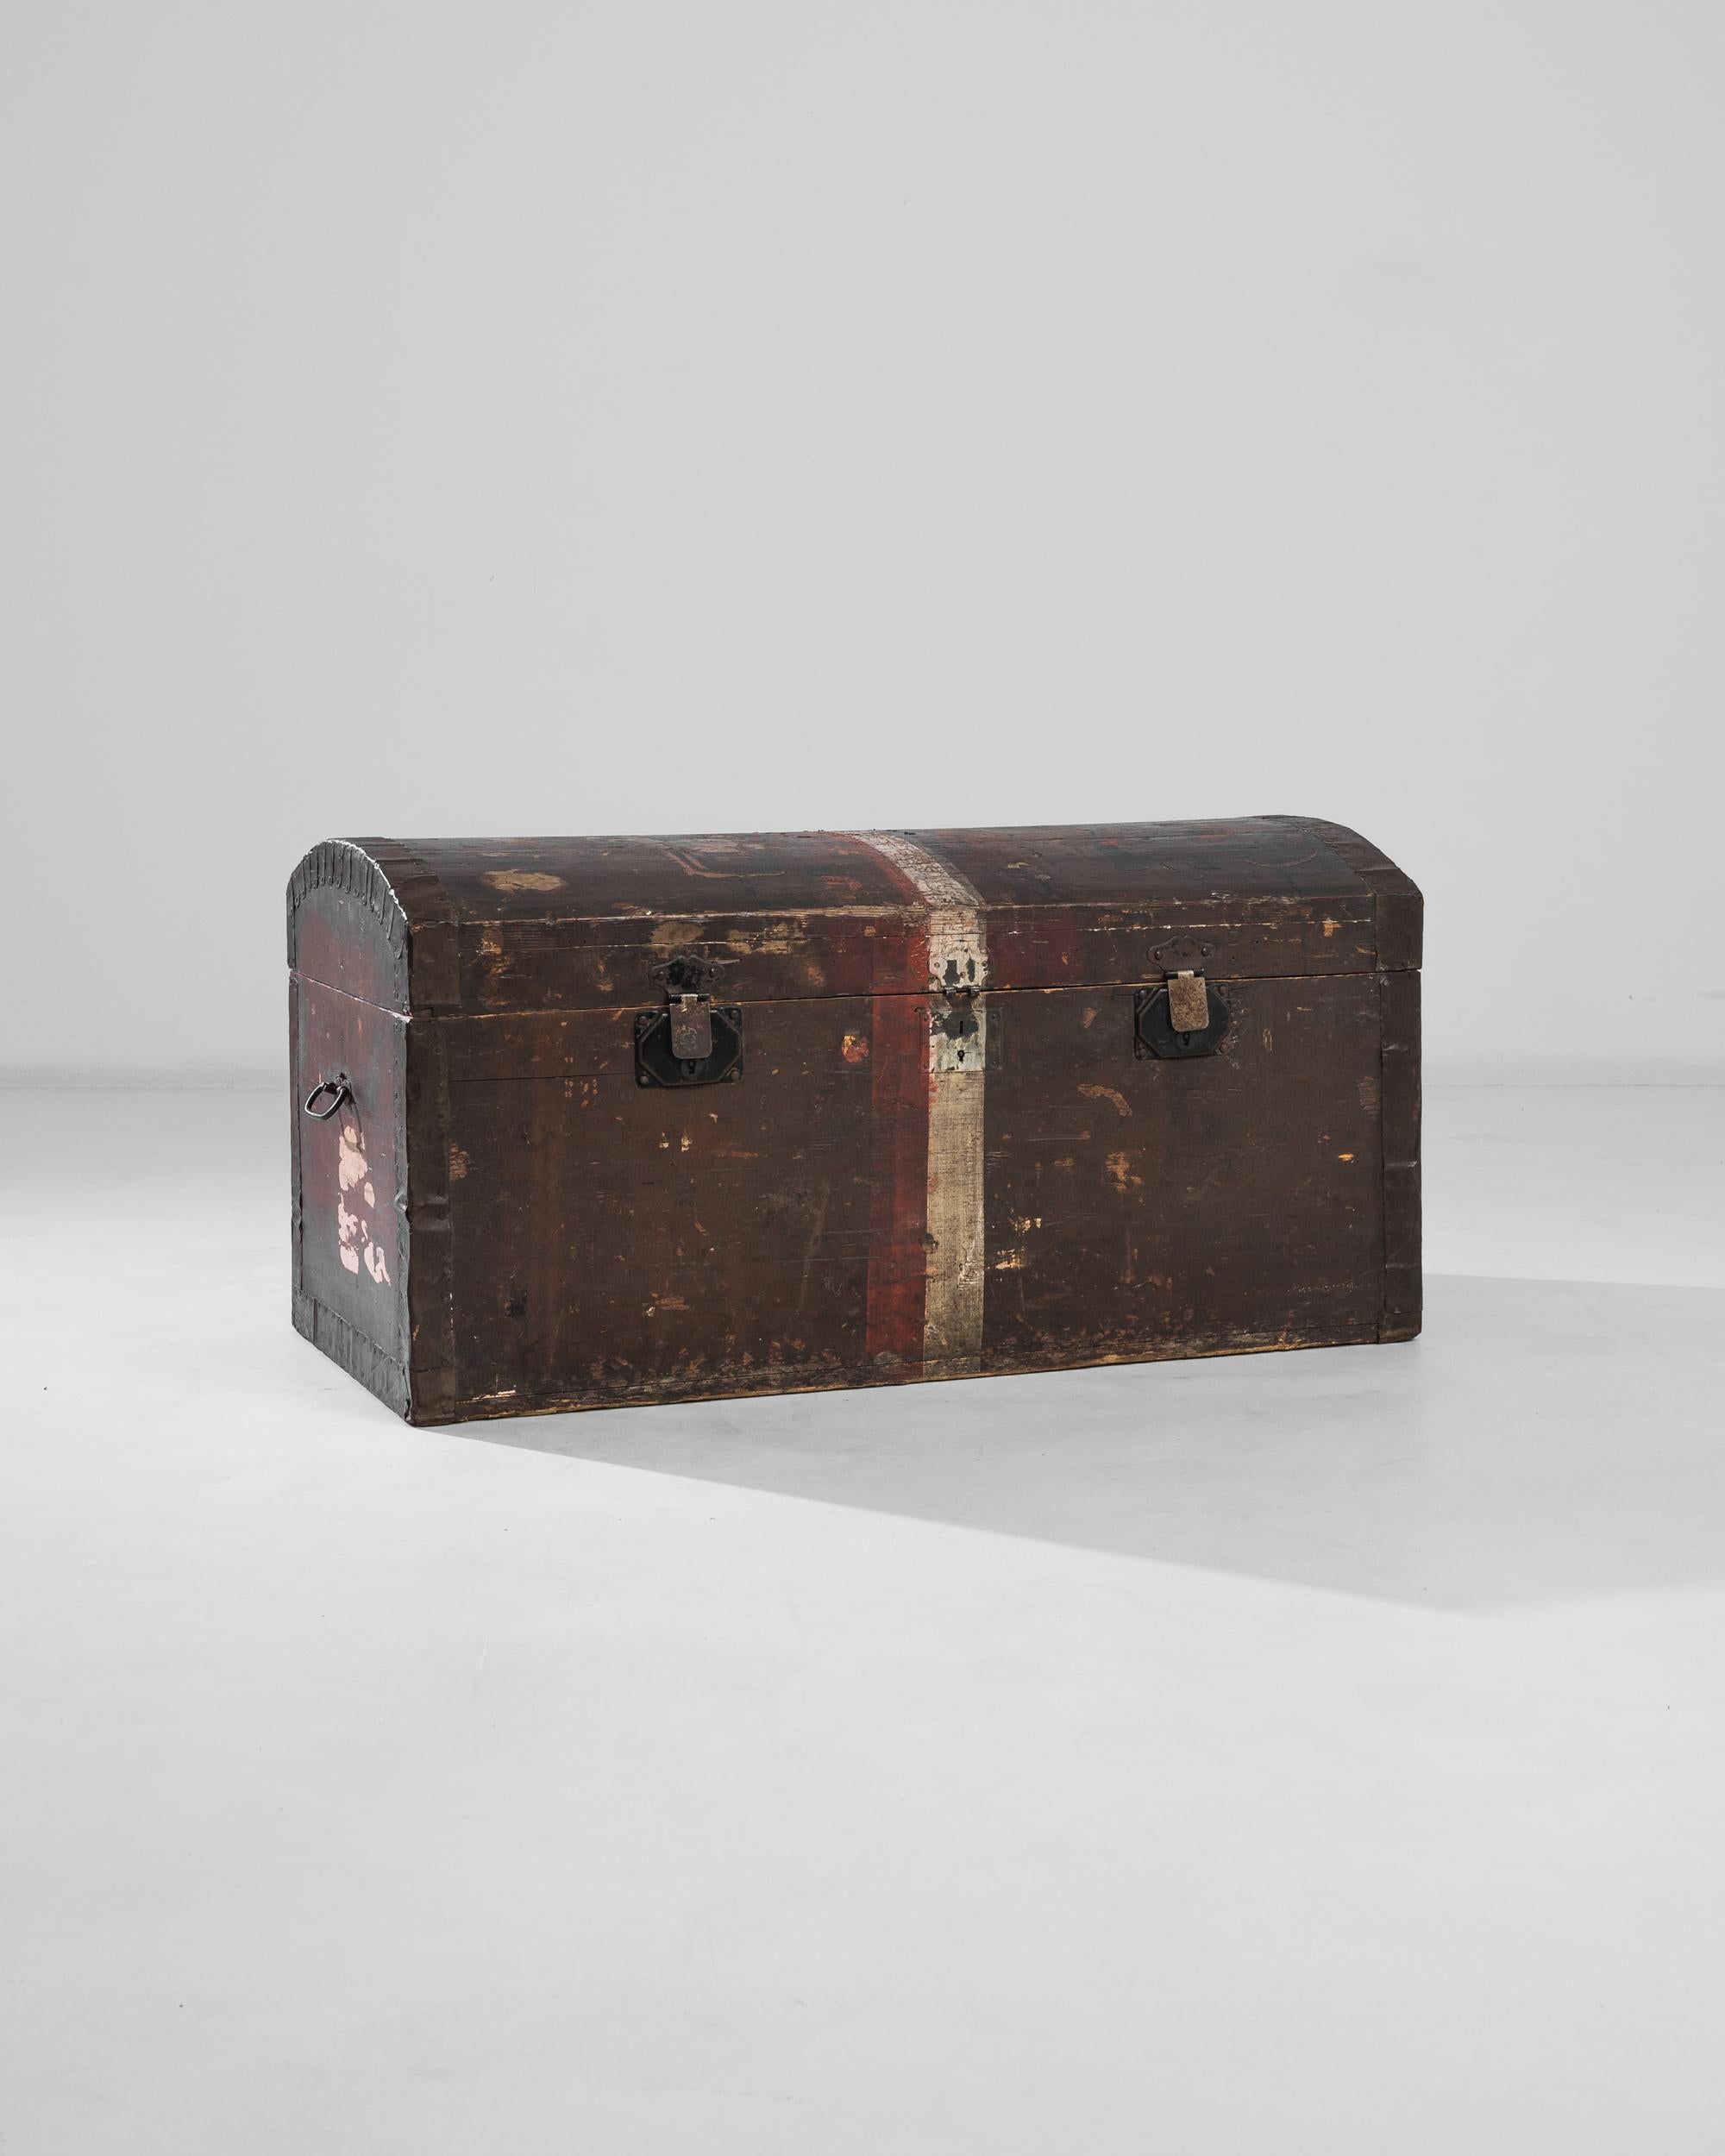 This stout trunk crafted out of wood in France circa 1900 features a convex lid that smoothes up the angularity of the case. The white-red stripe painted in the middle of the chest braces it like a ribbon, bringing a vivid contrasting element to the